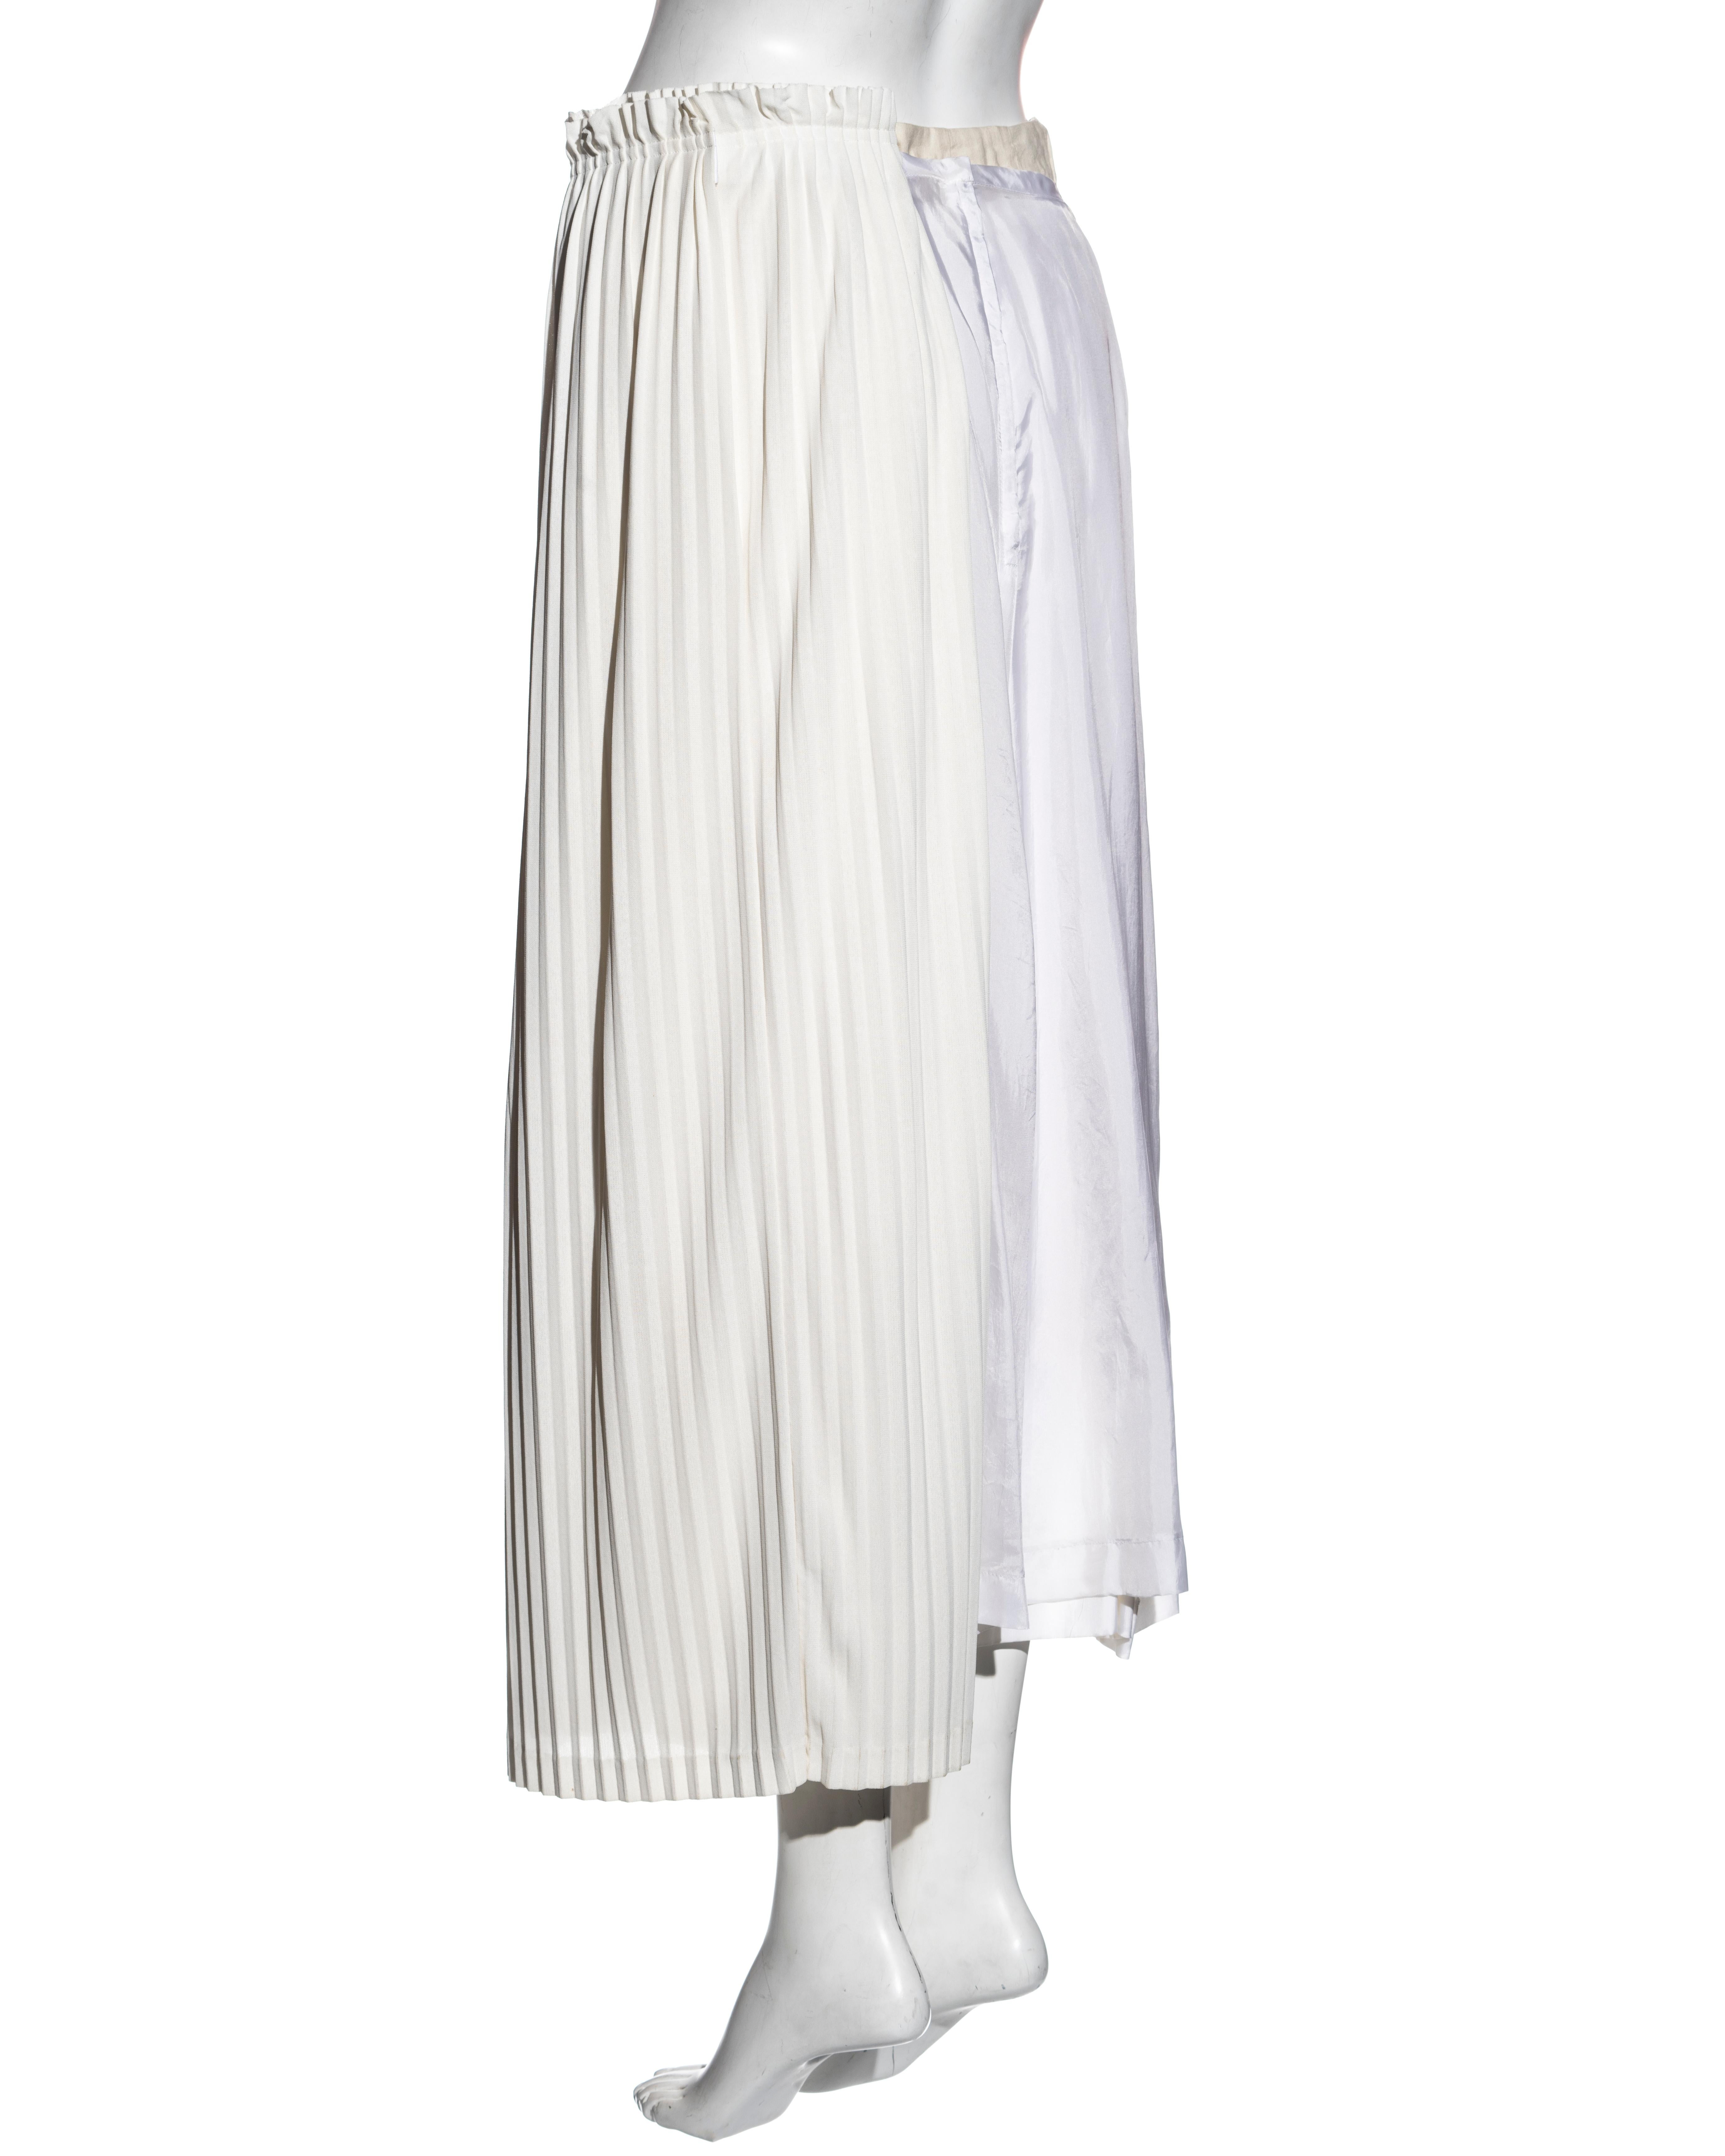 Comme des Garçons deconstructed cream accordion pleated skirt, ss 2002 In Excellent Condition For Sale In London, GB